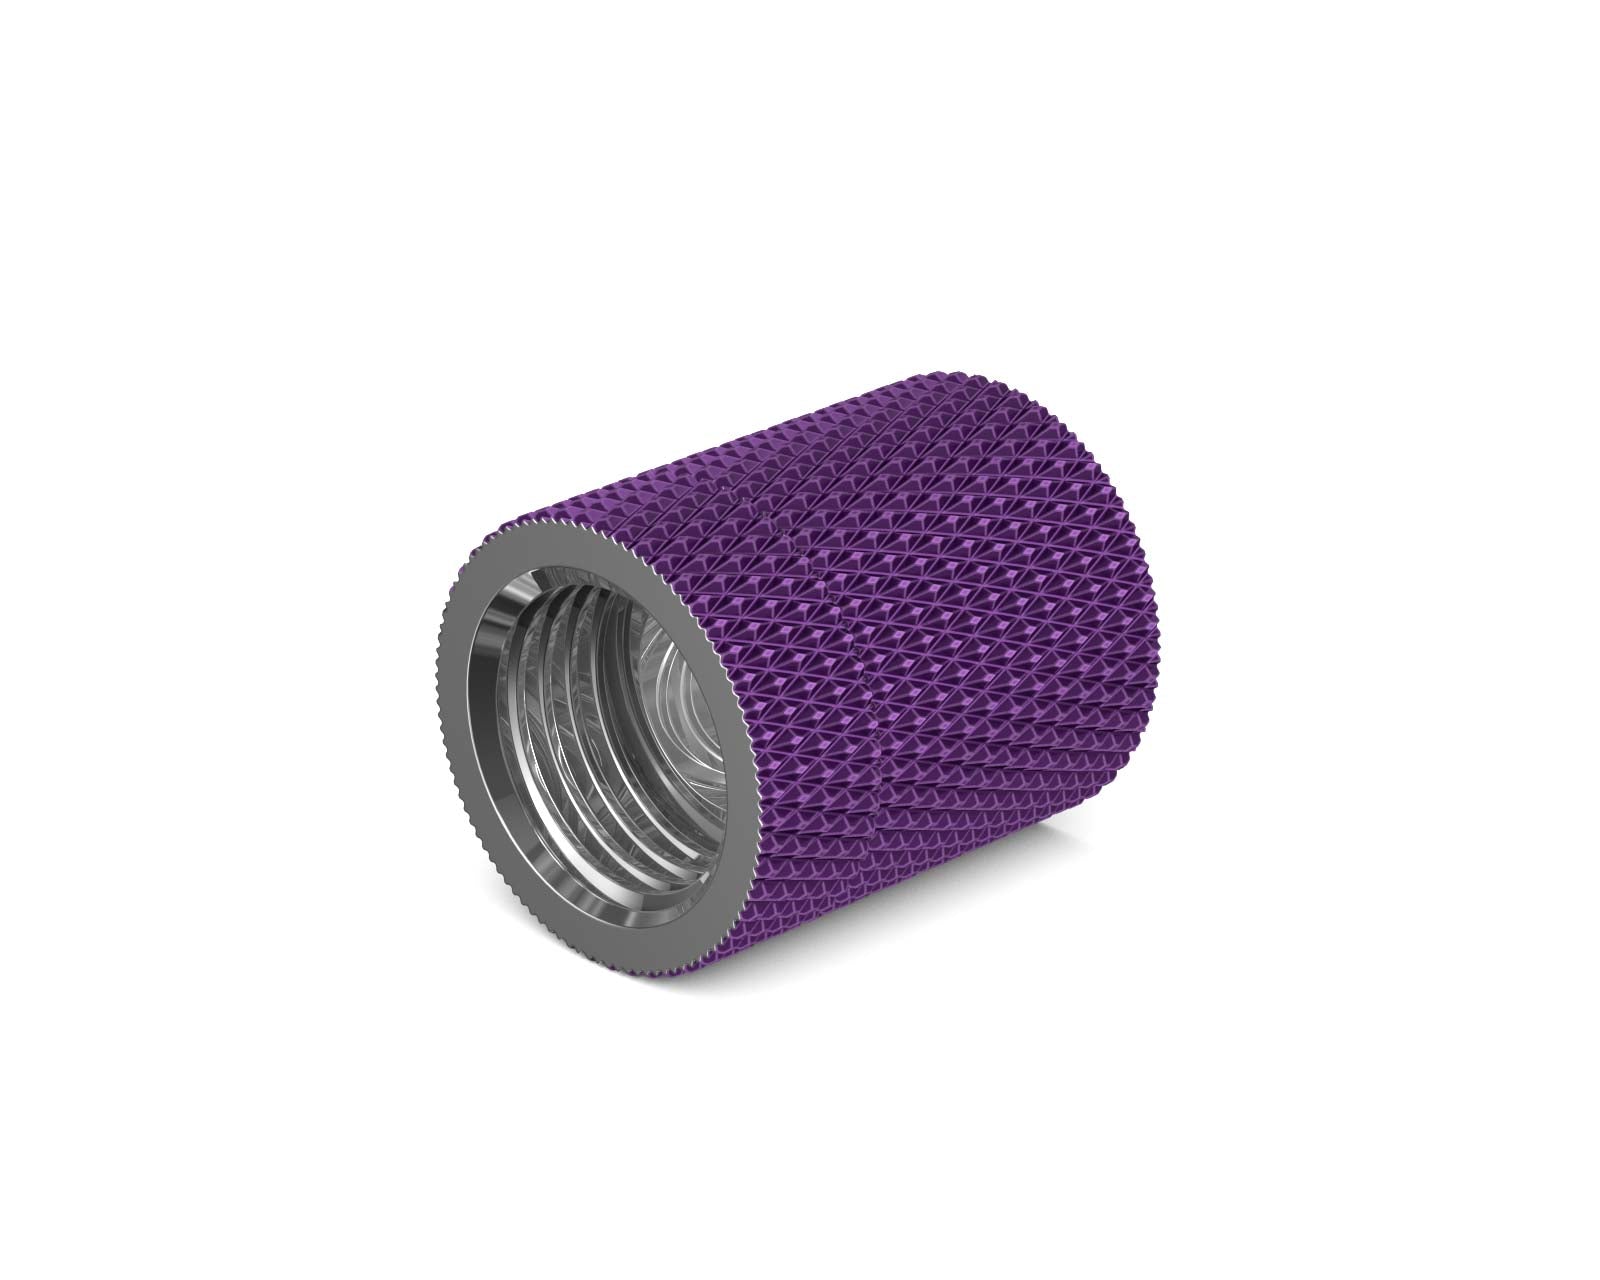 PrimoChill Dual Female G 1/4in. SX Rotary Extension Coupler - PrimoChill - KEEPING IT COOL Candy Purple